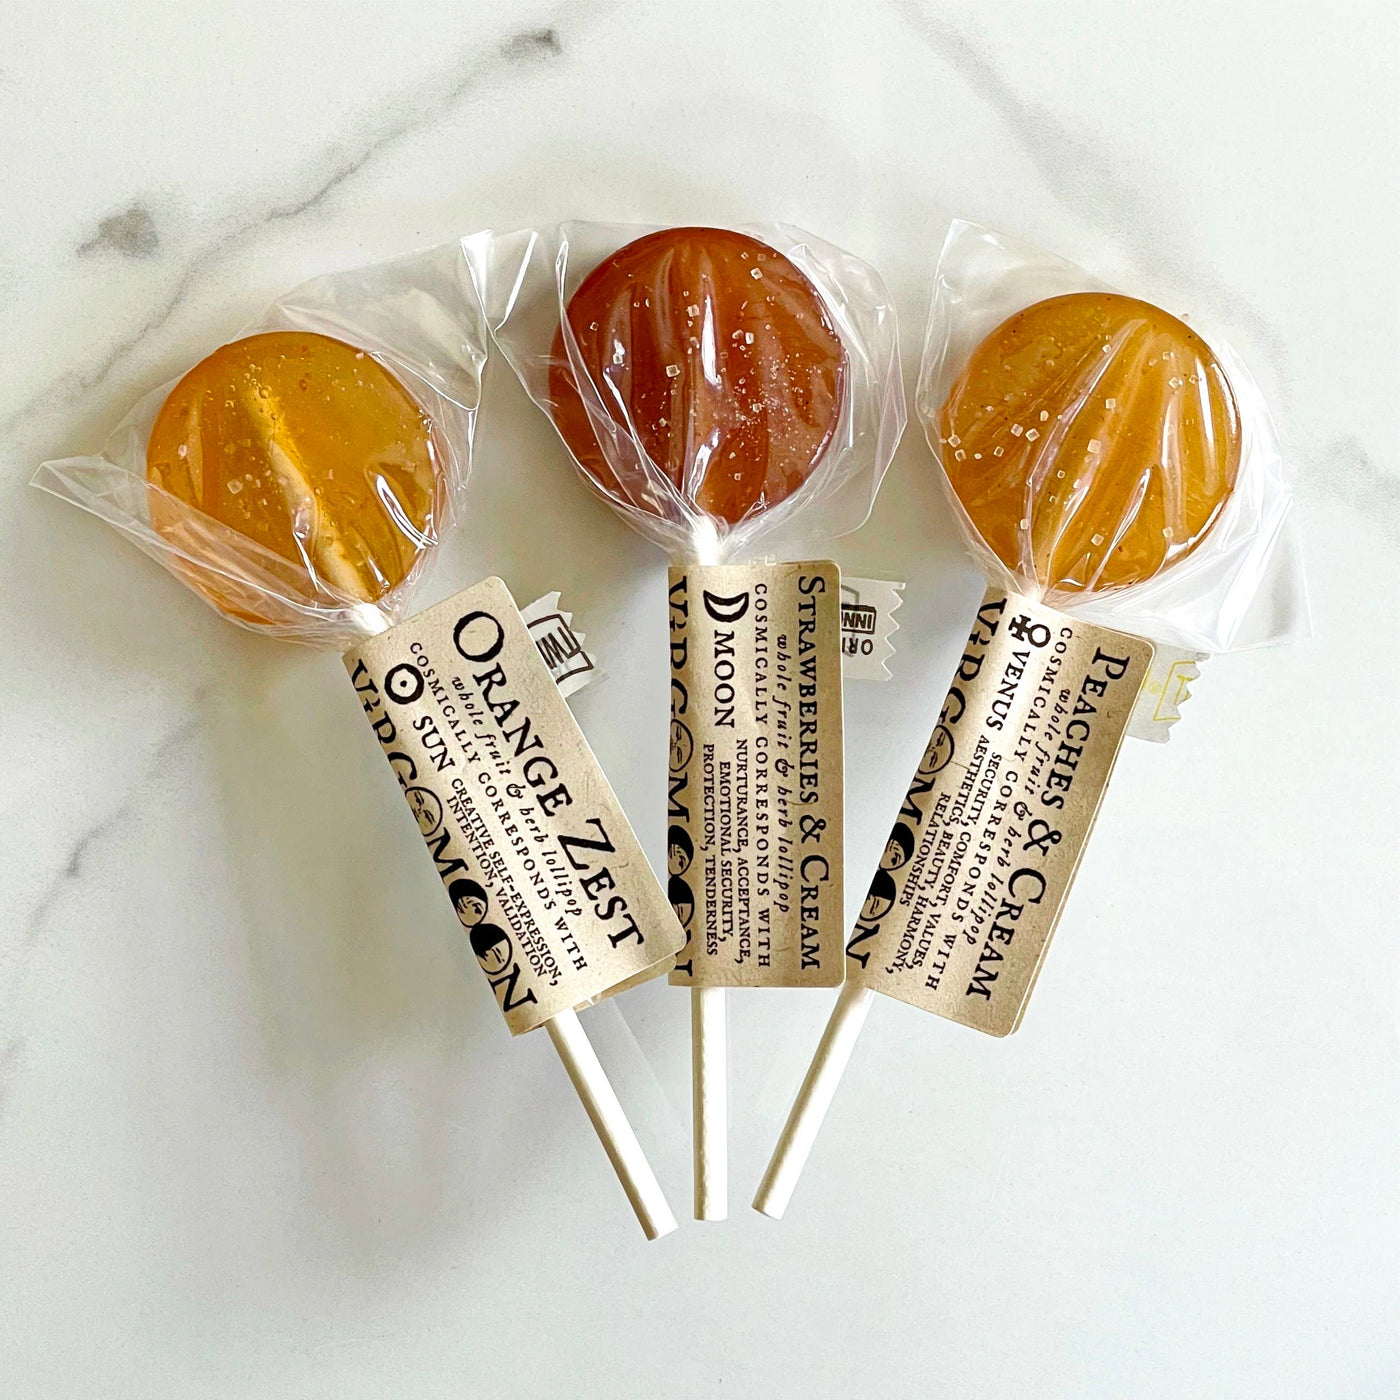 Plants & Planets Lollipops - Cosmic Candy Apothecary: Peaches & Cream